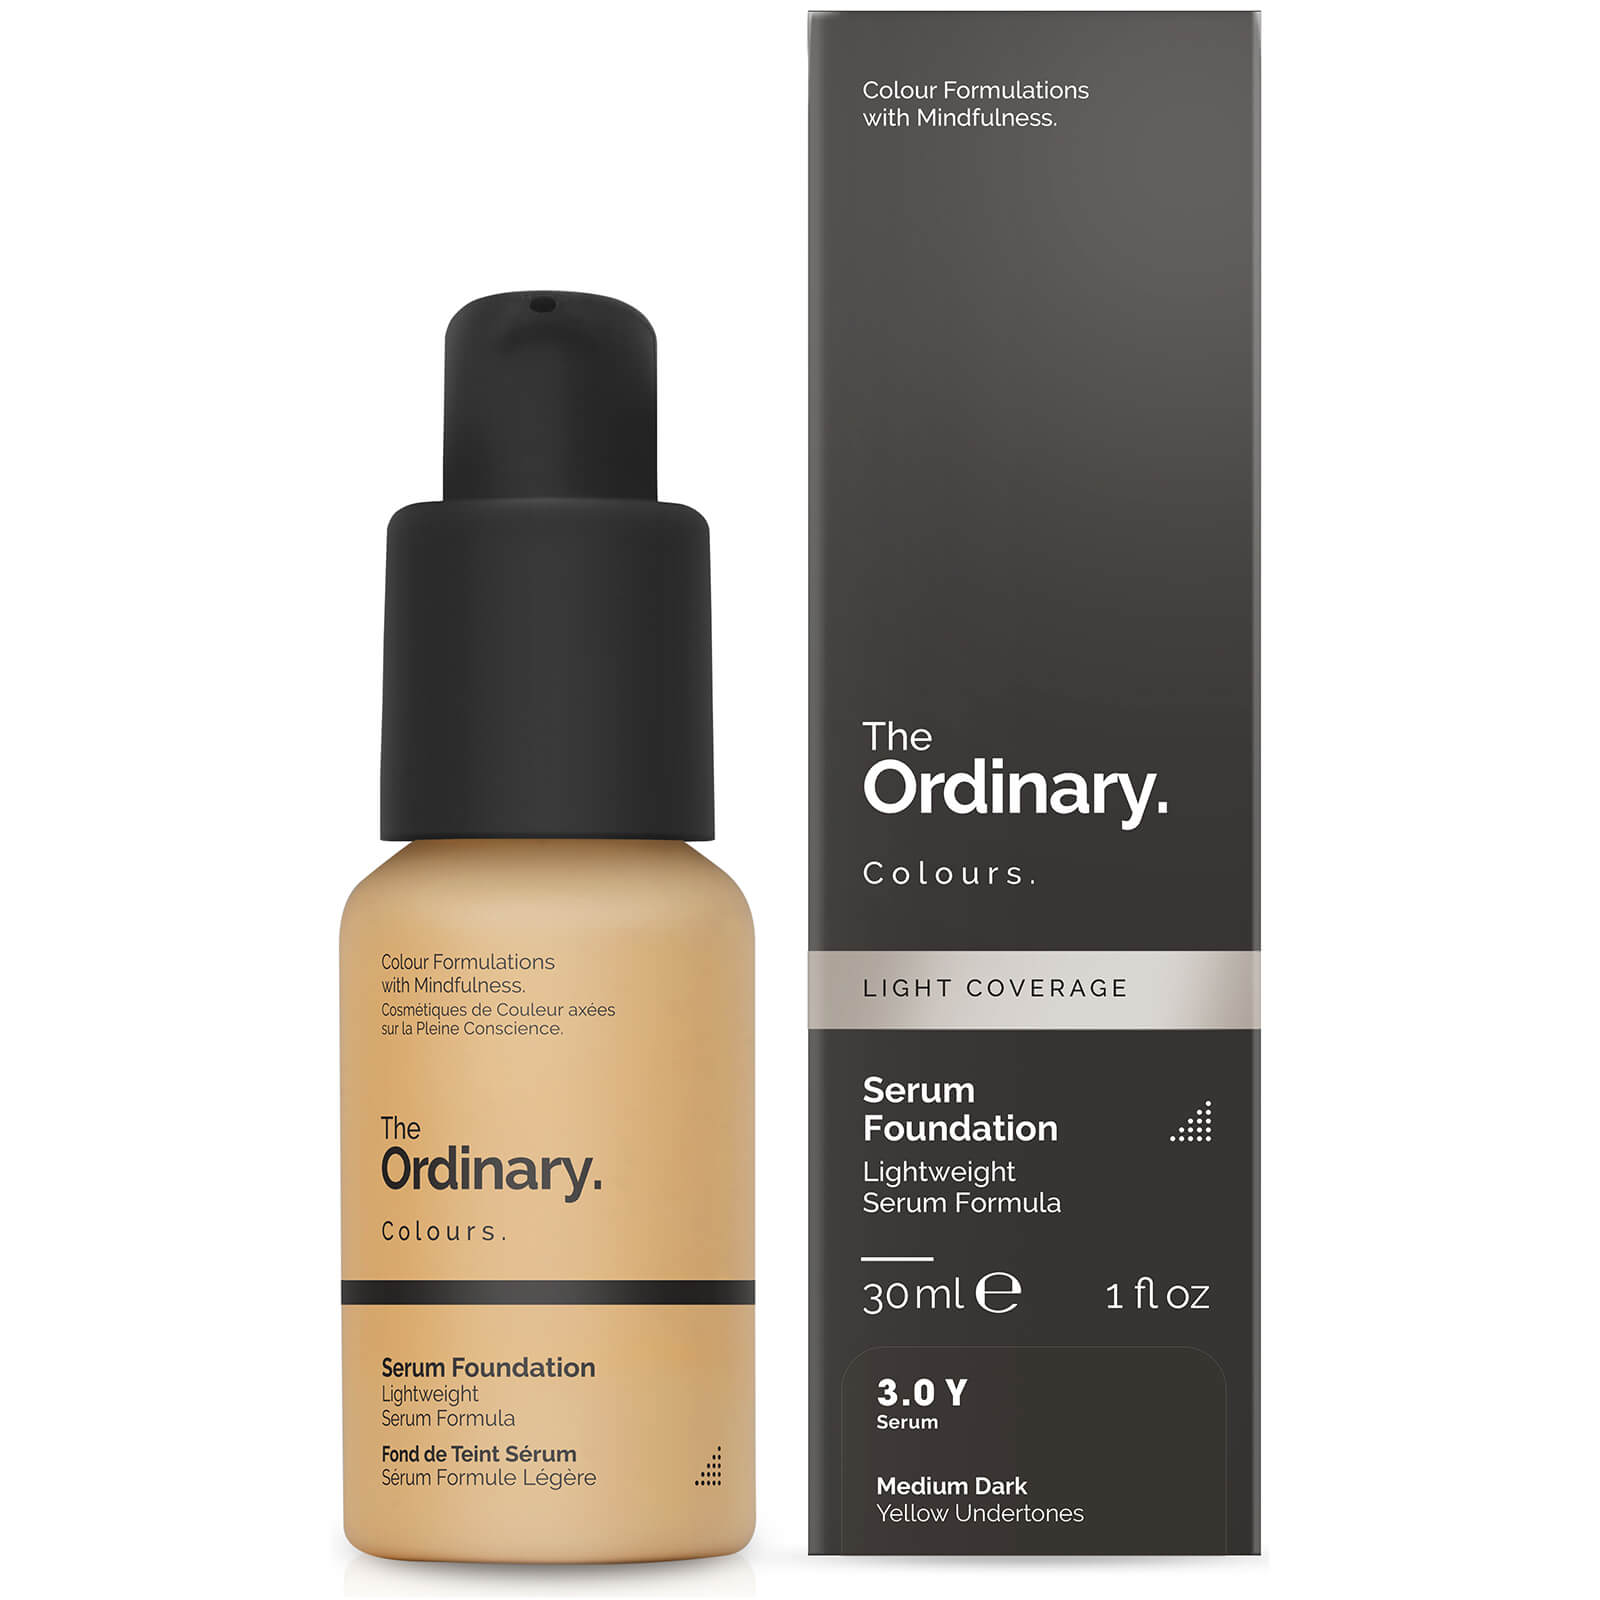 The Ordinary Serum Foundation with SPF 15 by The Ordinary Colours 30ml (Various Shades) - 3.0Y